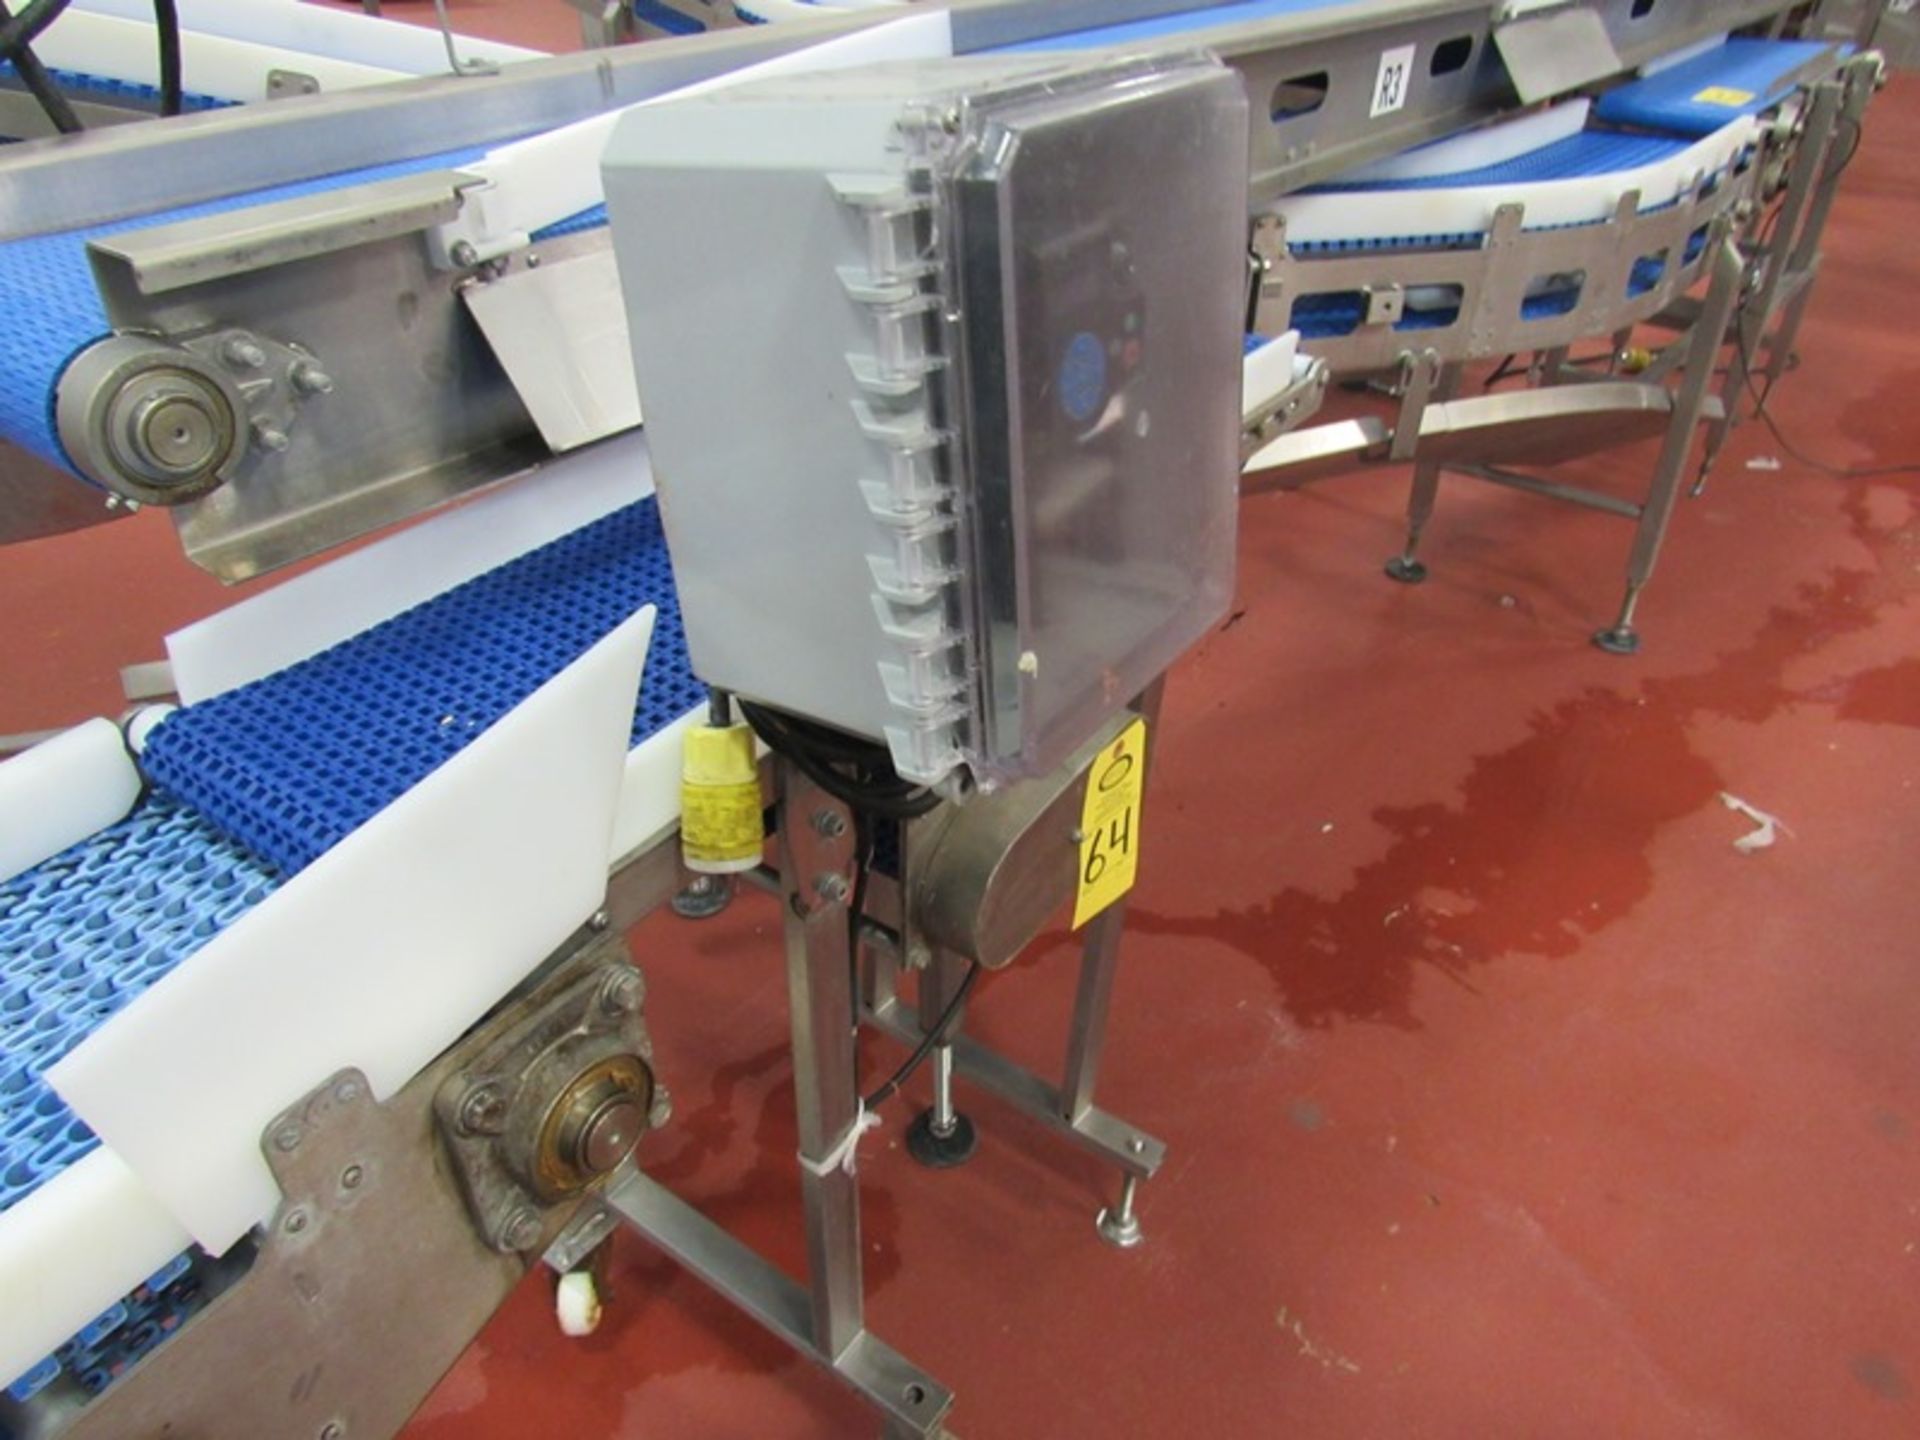 Portable Stainless Steel Conveyor, 9" W X 38" L plastic belt, V.F.D. (Required Loading Fee $50.00 - Image 2 of 7